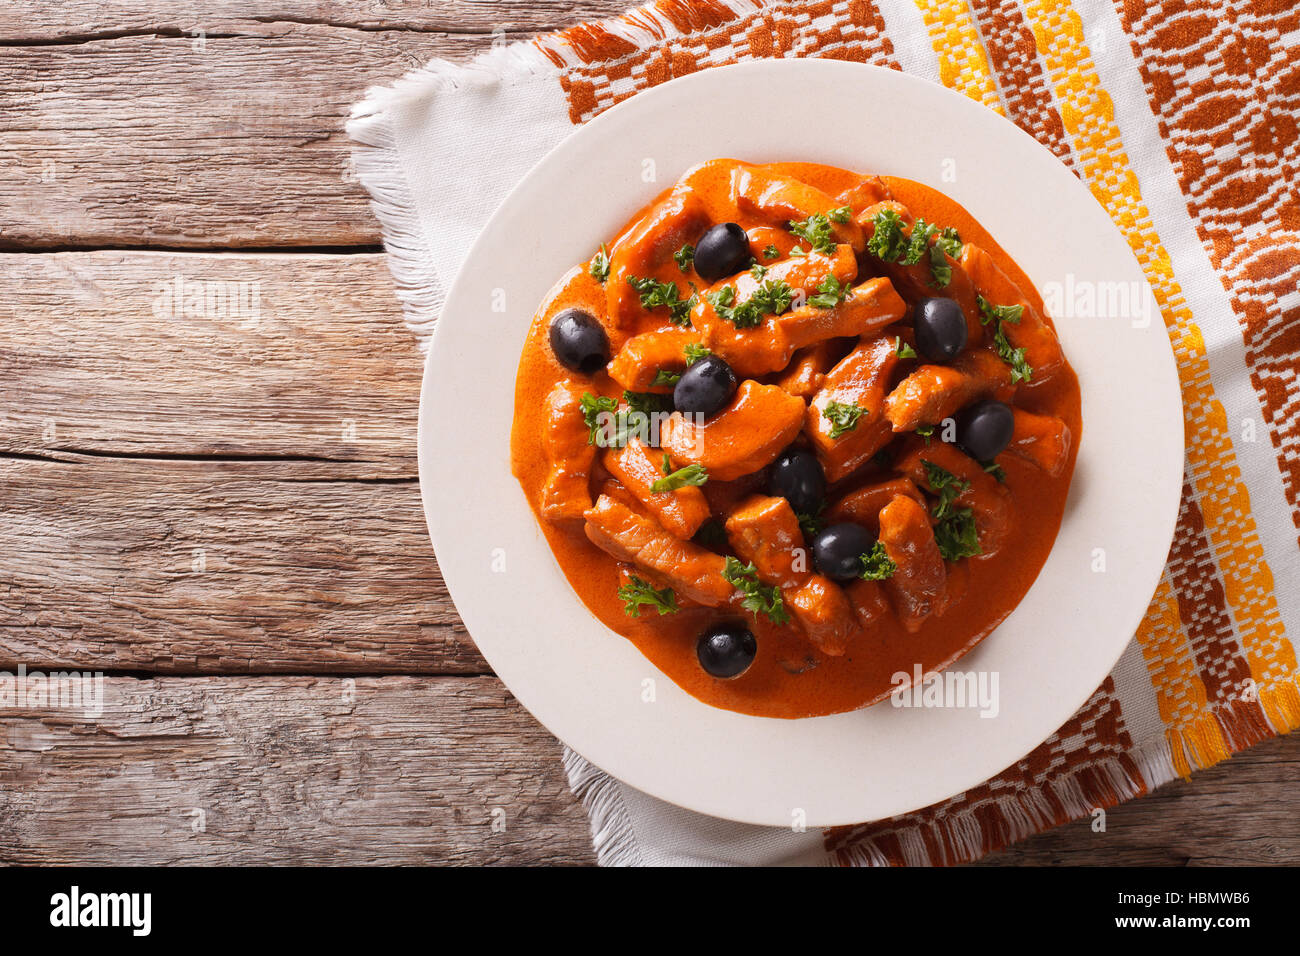 Spanish pieces of pork stewed in a spicy sauce of wine, tomatoes and cream with black olives close-up on a plate. Horizontal view from above Stock Photo